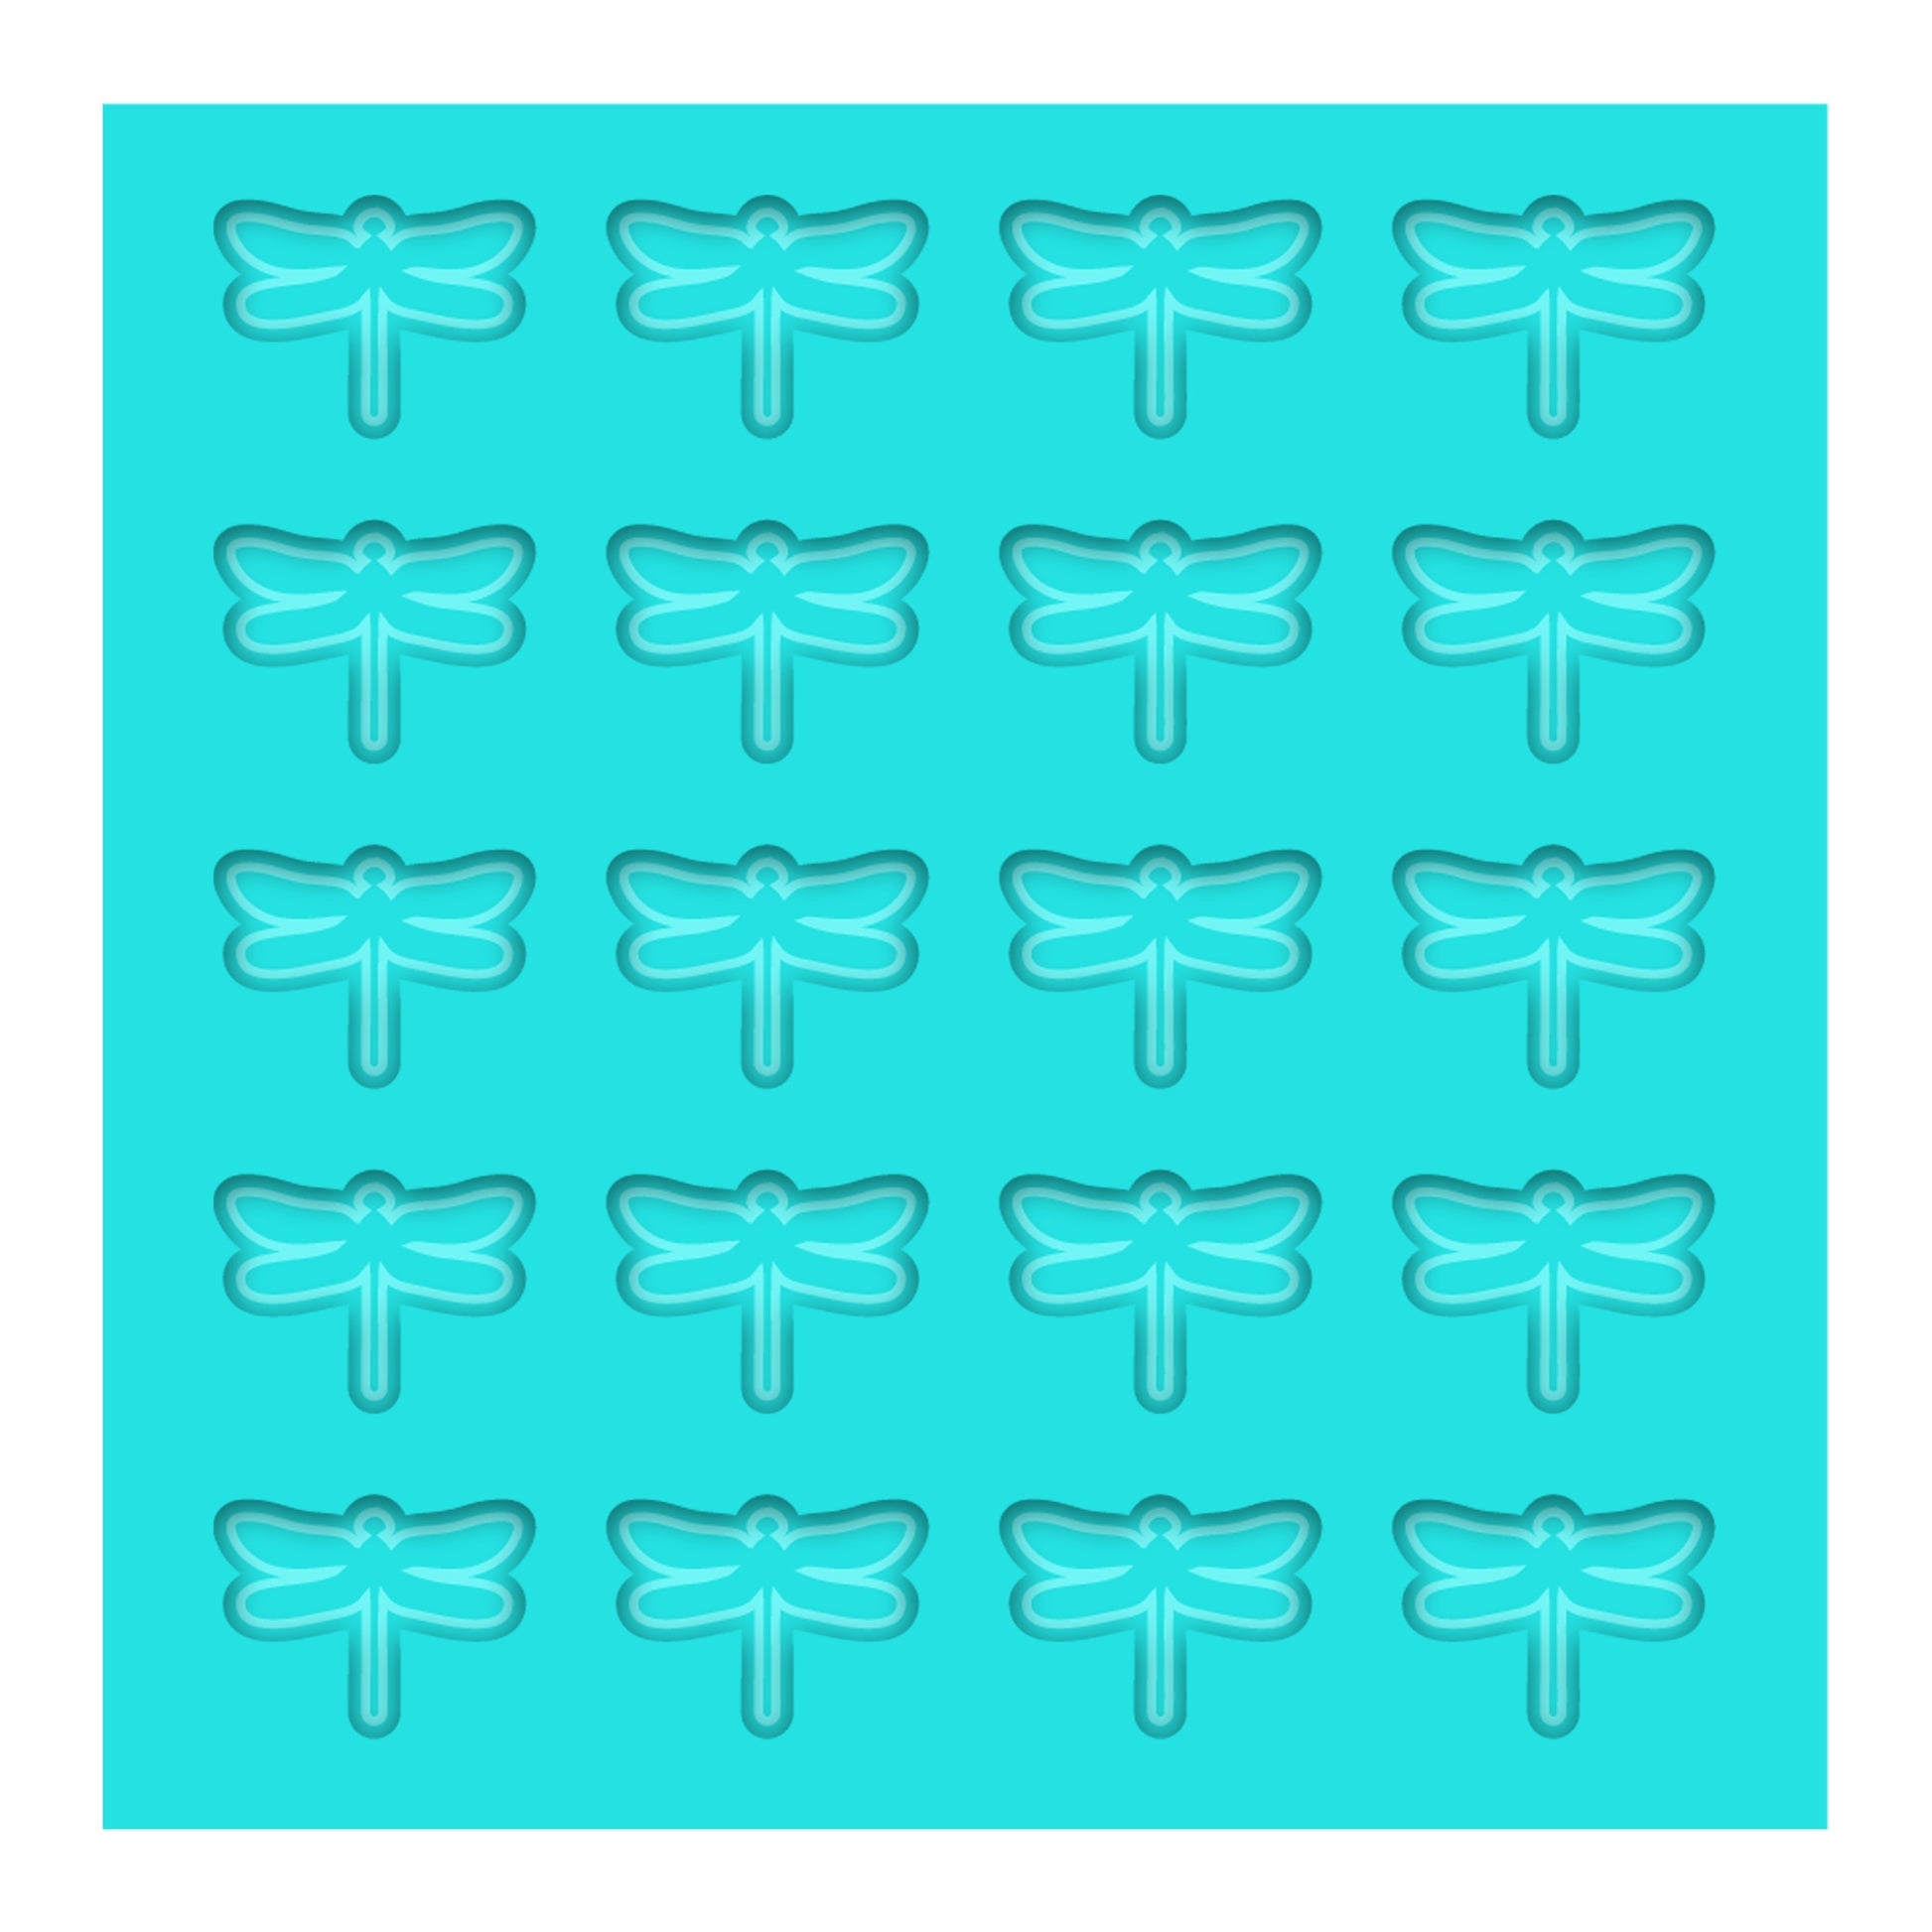 a pattern of dragonflies on a blue background